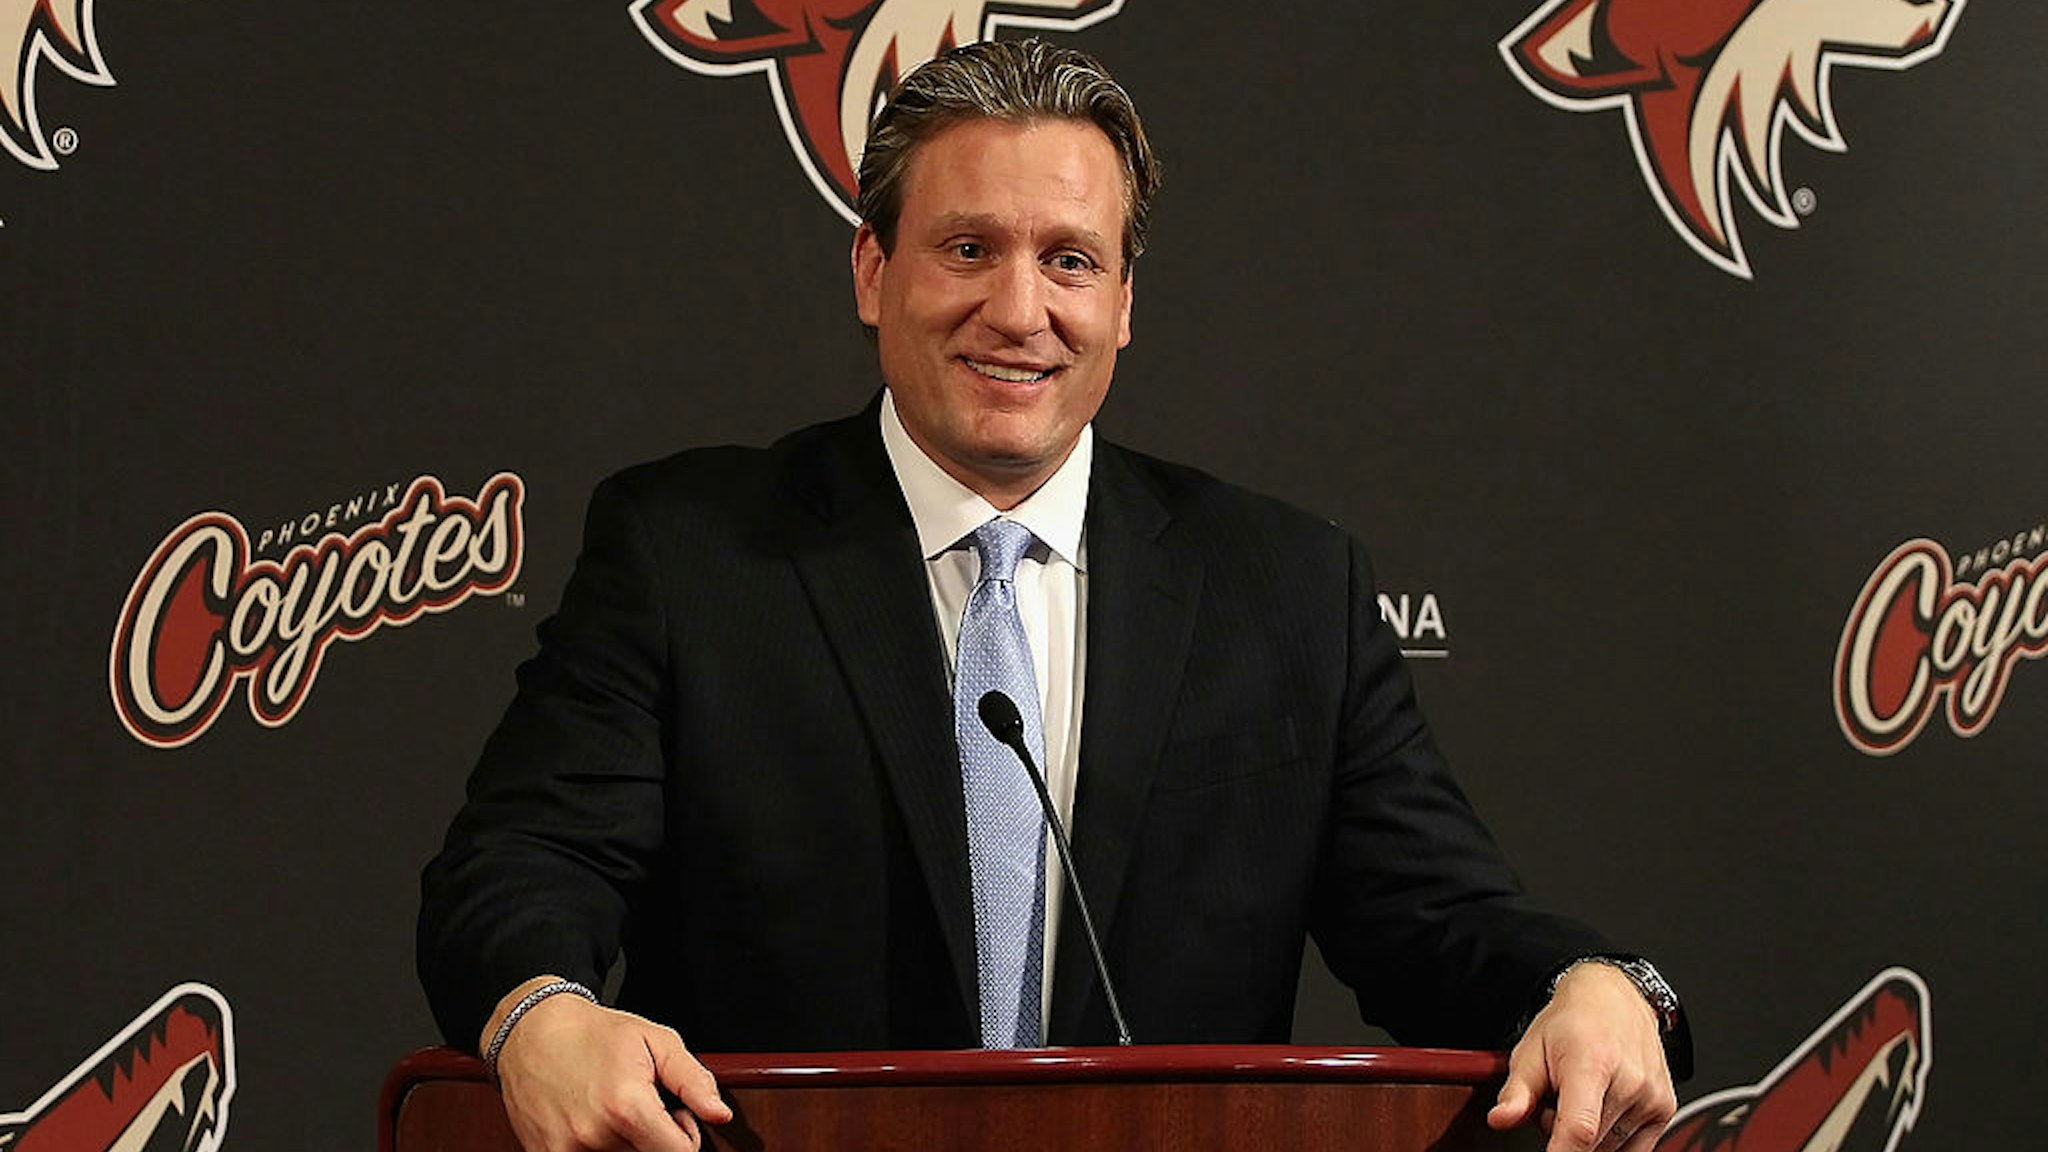 Jeremy Roenick speaks at a press conference before the NHL game between the Chicago Blackhawks and the Phoenix Coyotes at Jobing.com Arena on February 11, 2012 in Glendale, Arizona.